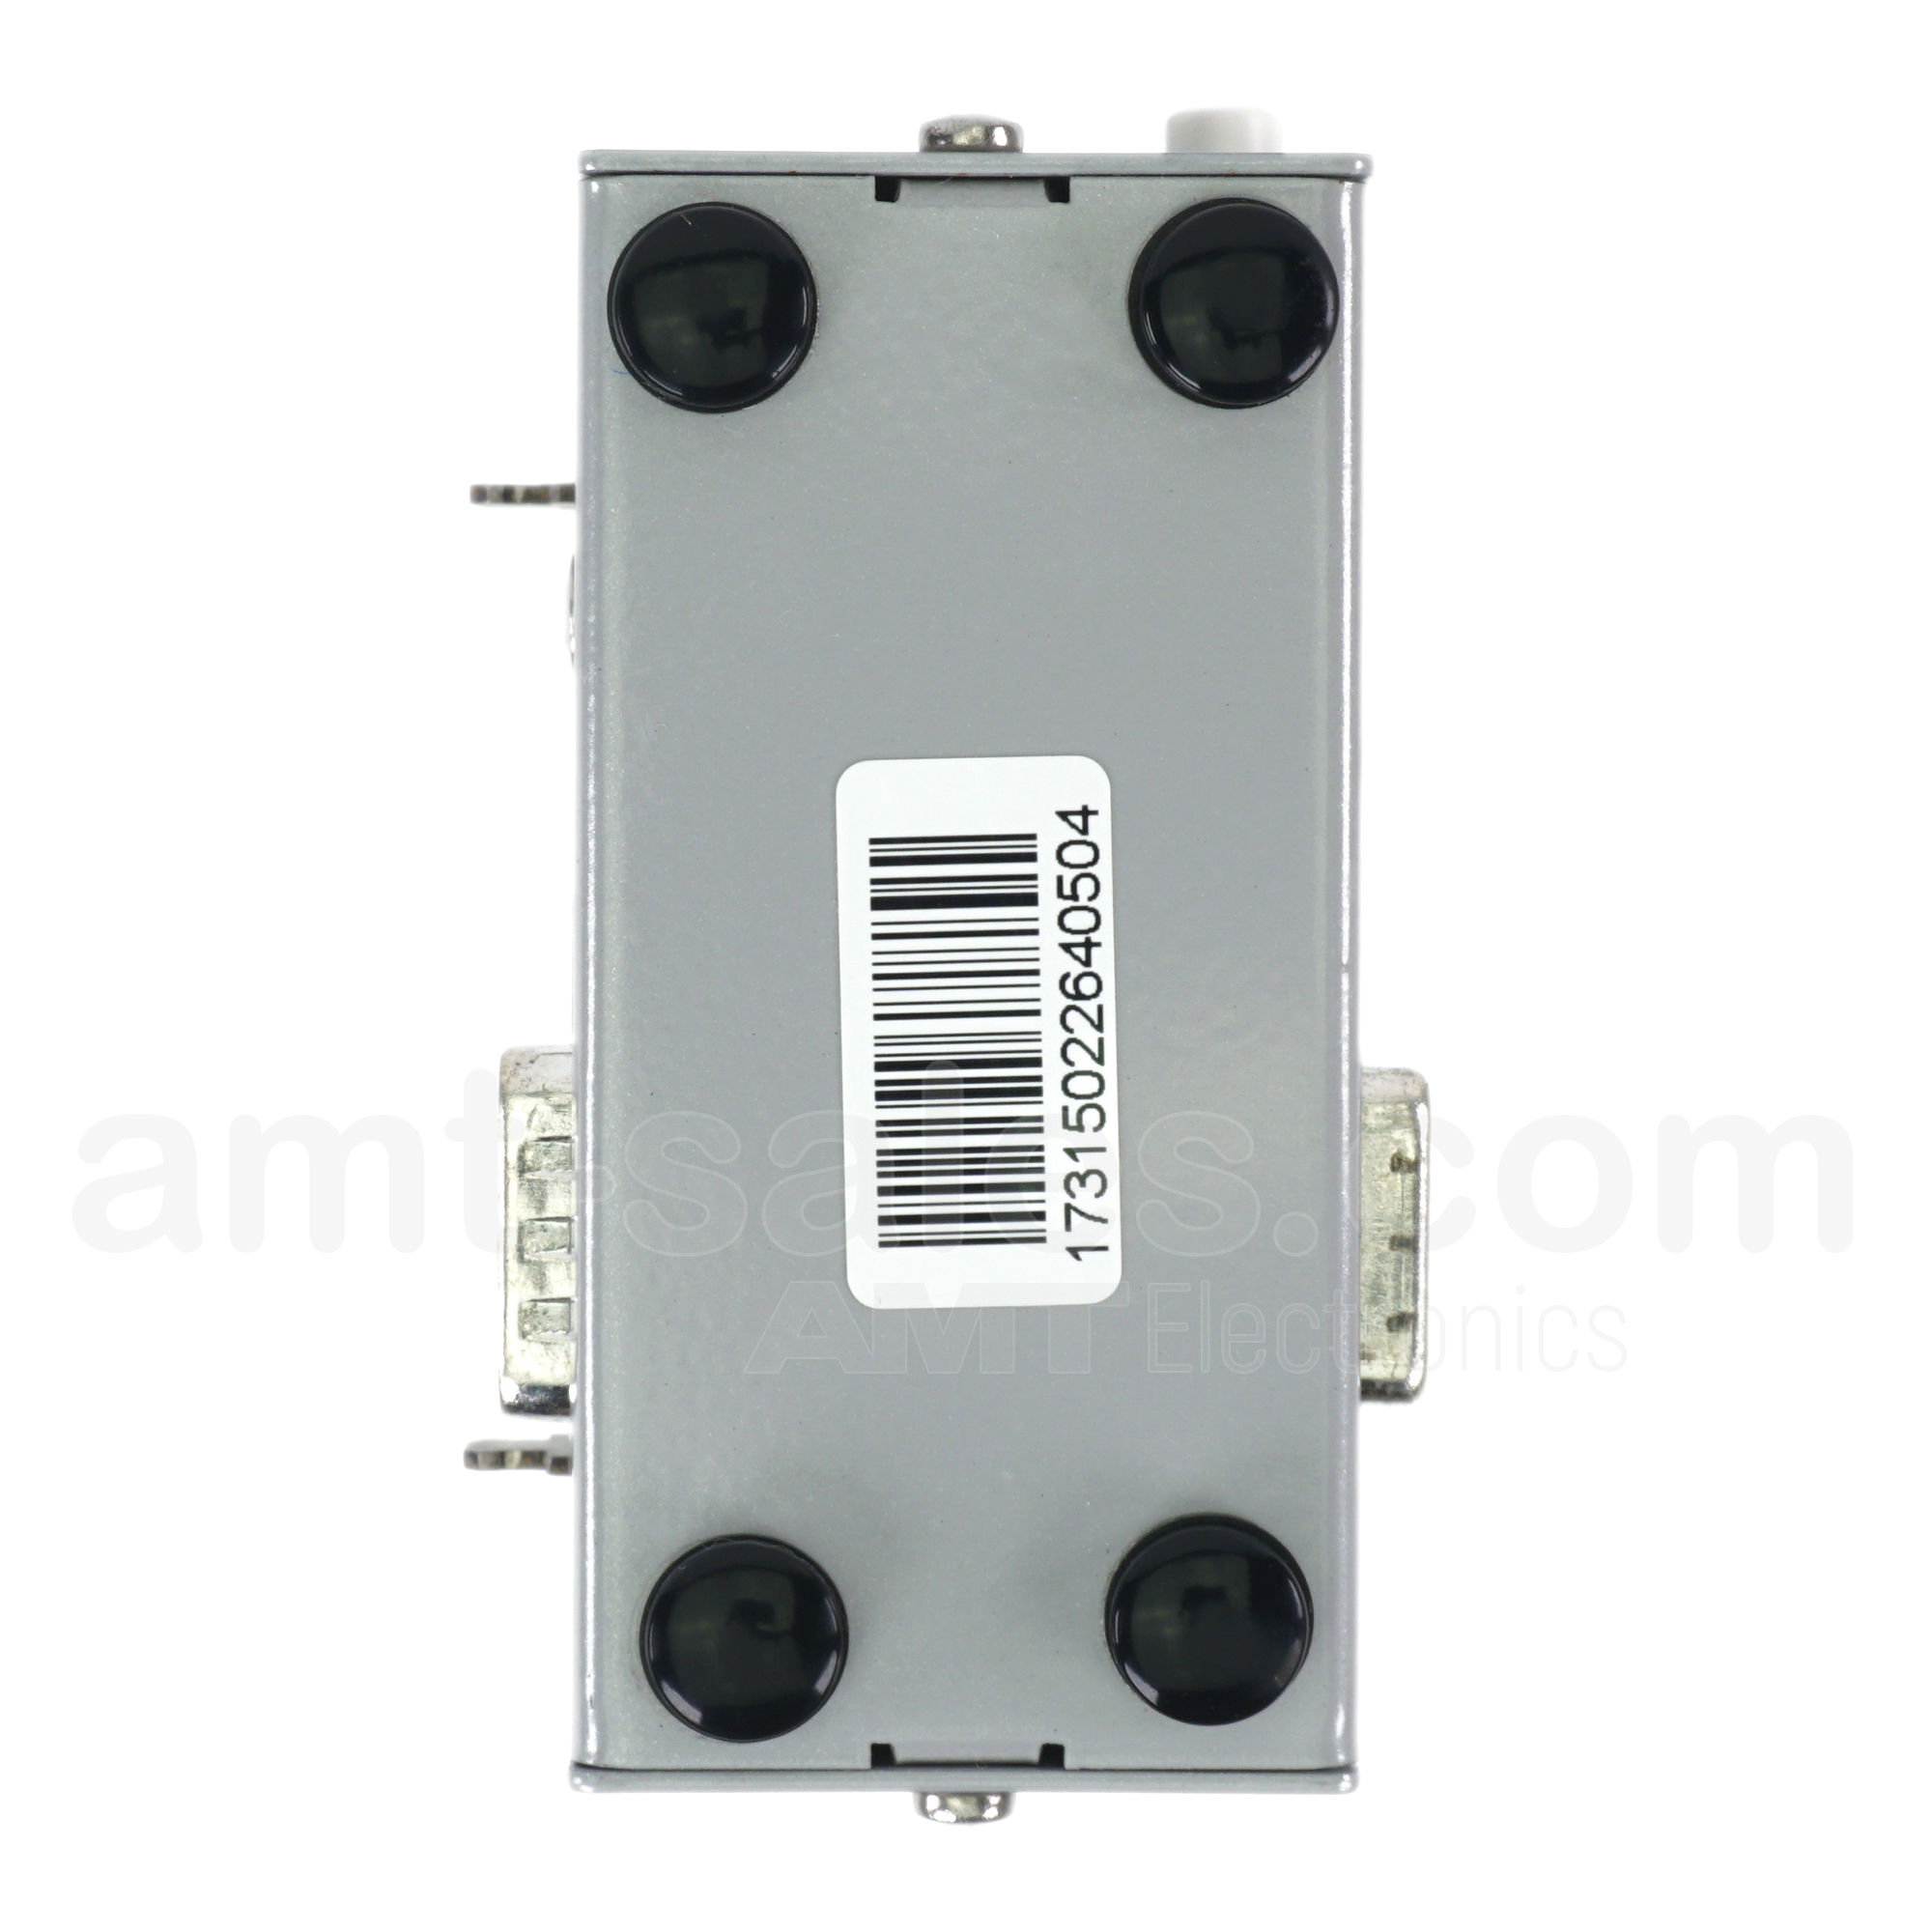 AMT SOW PS DC-9V 1x700mA - power supply module